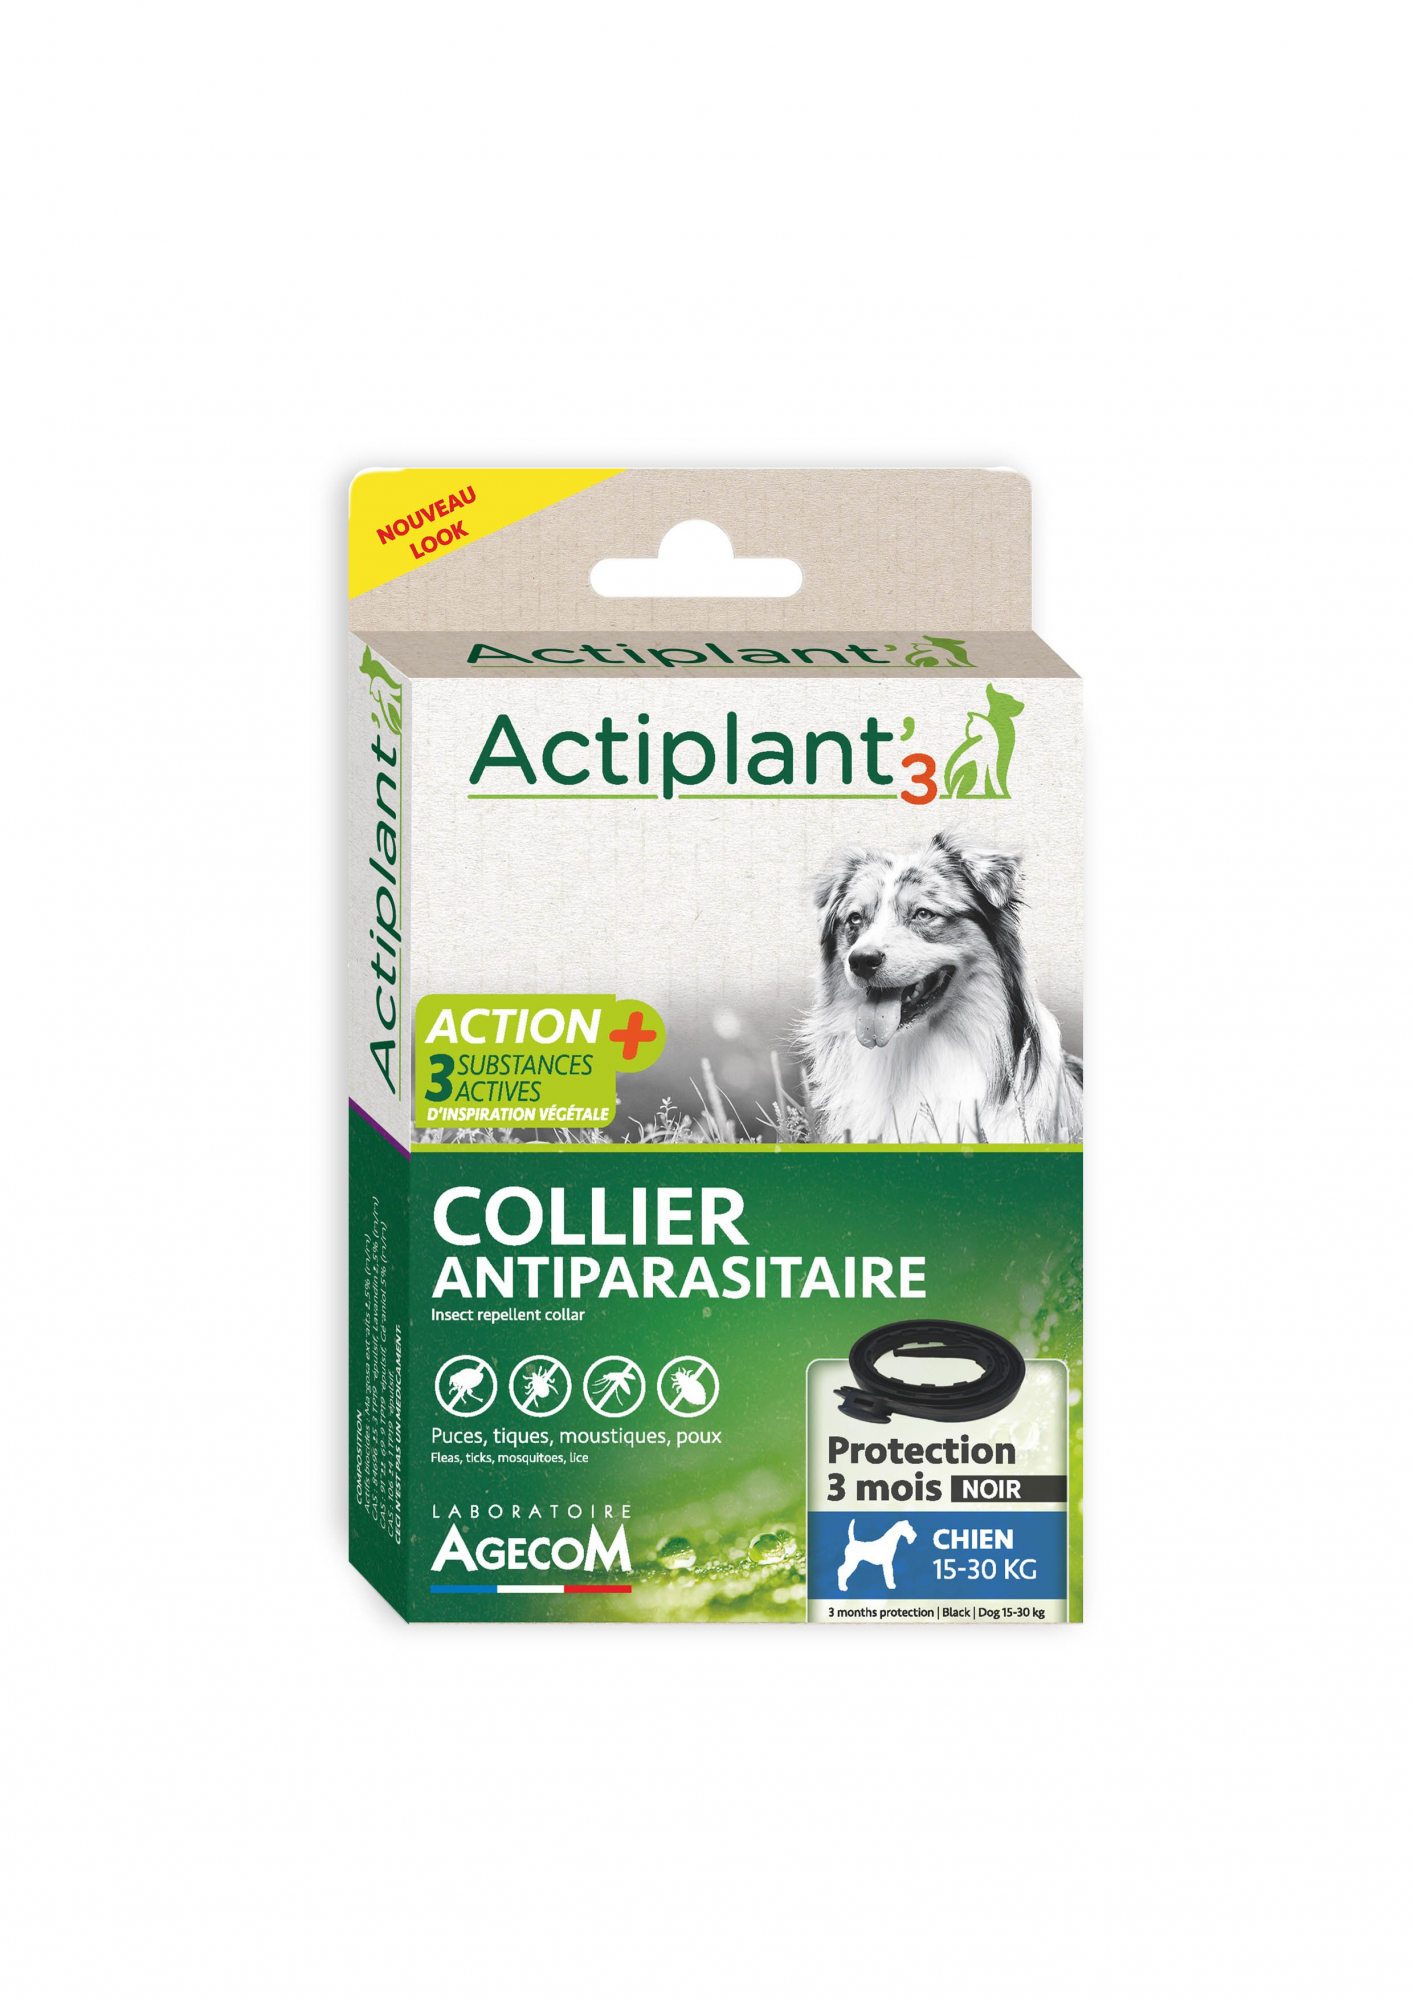 Collier ACT3 insectifuge antiparasitaire pour chien 